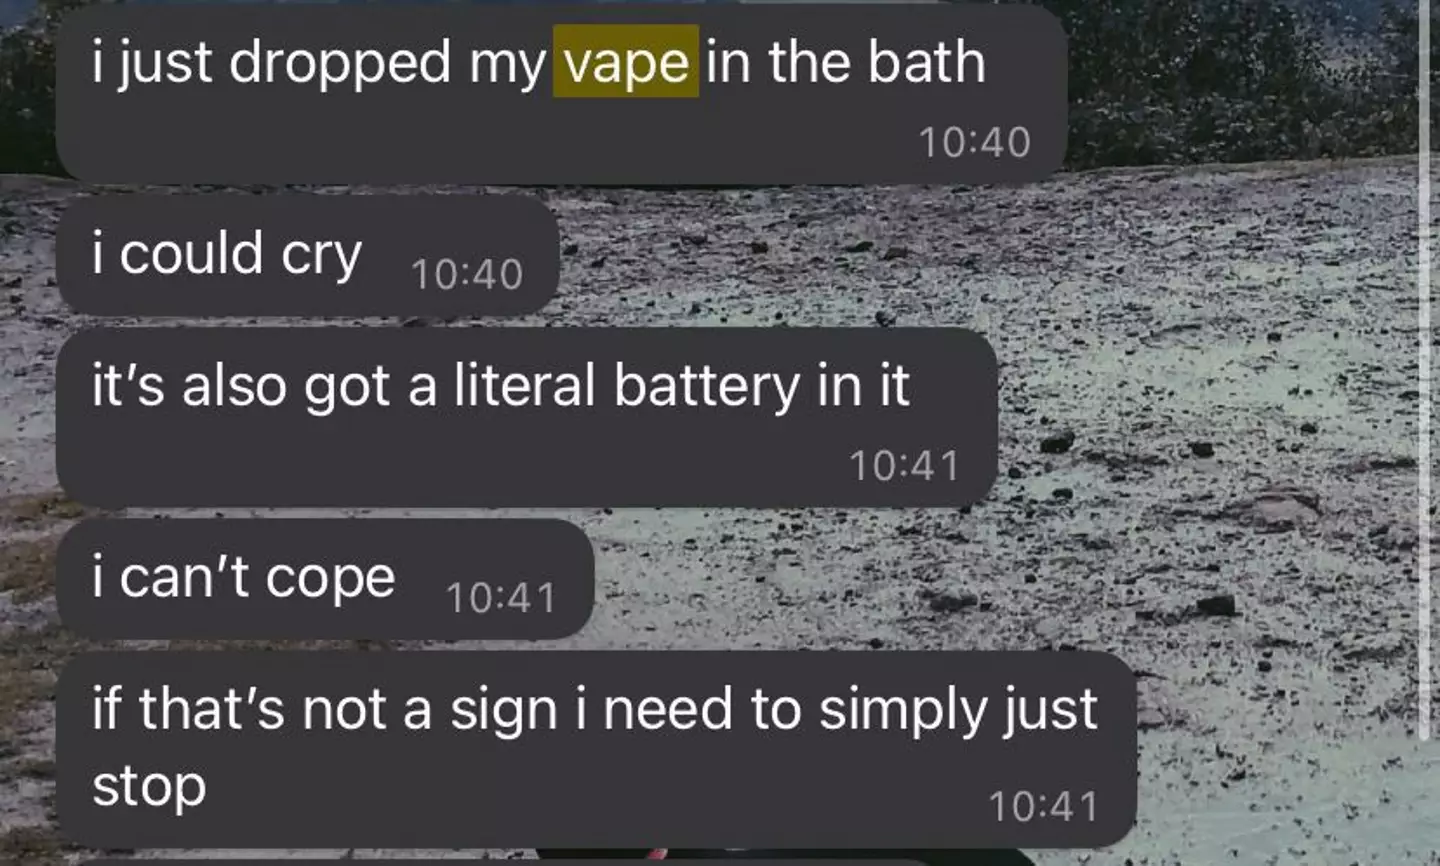 Yes, this is a real text message exchange I sent. I was so addicted I nearly electrocuted myself in the bath because I couldn't go without for half an hour... what a saddo.